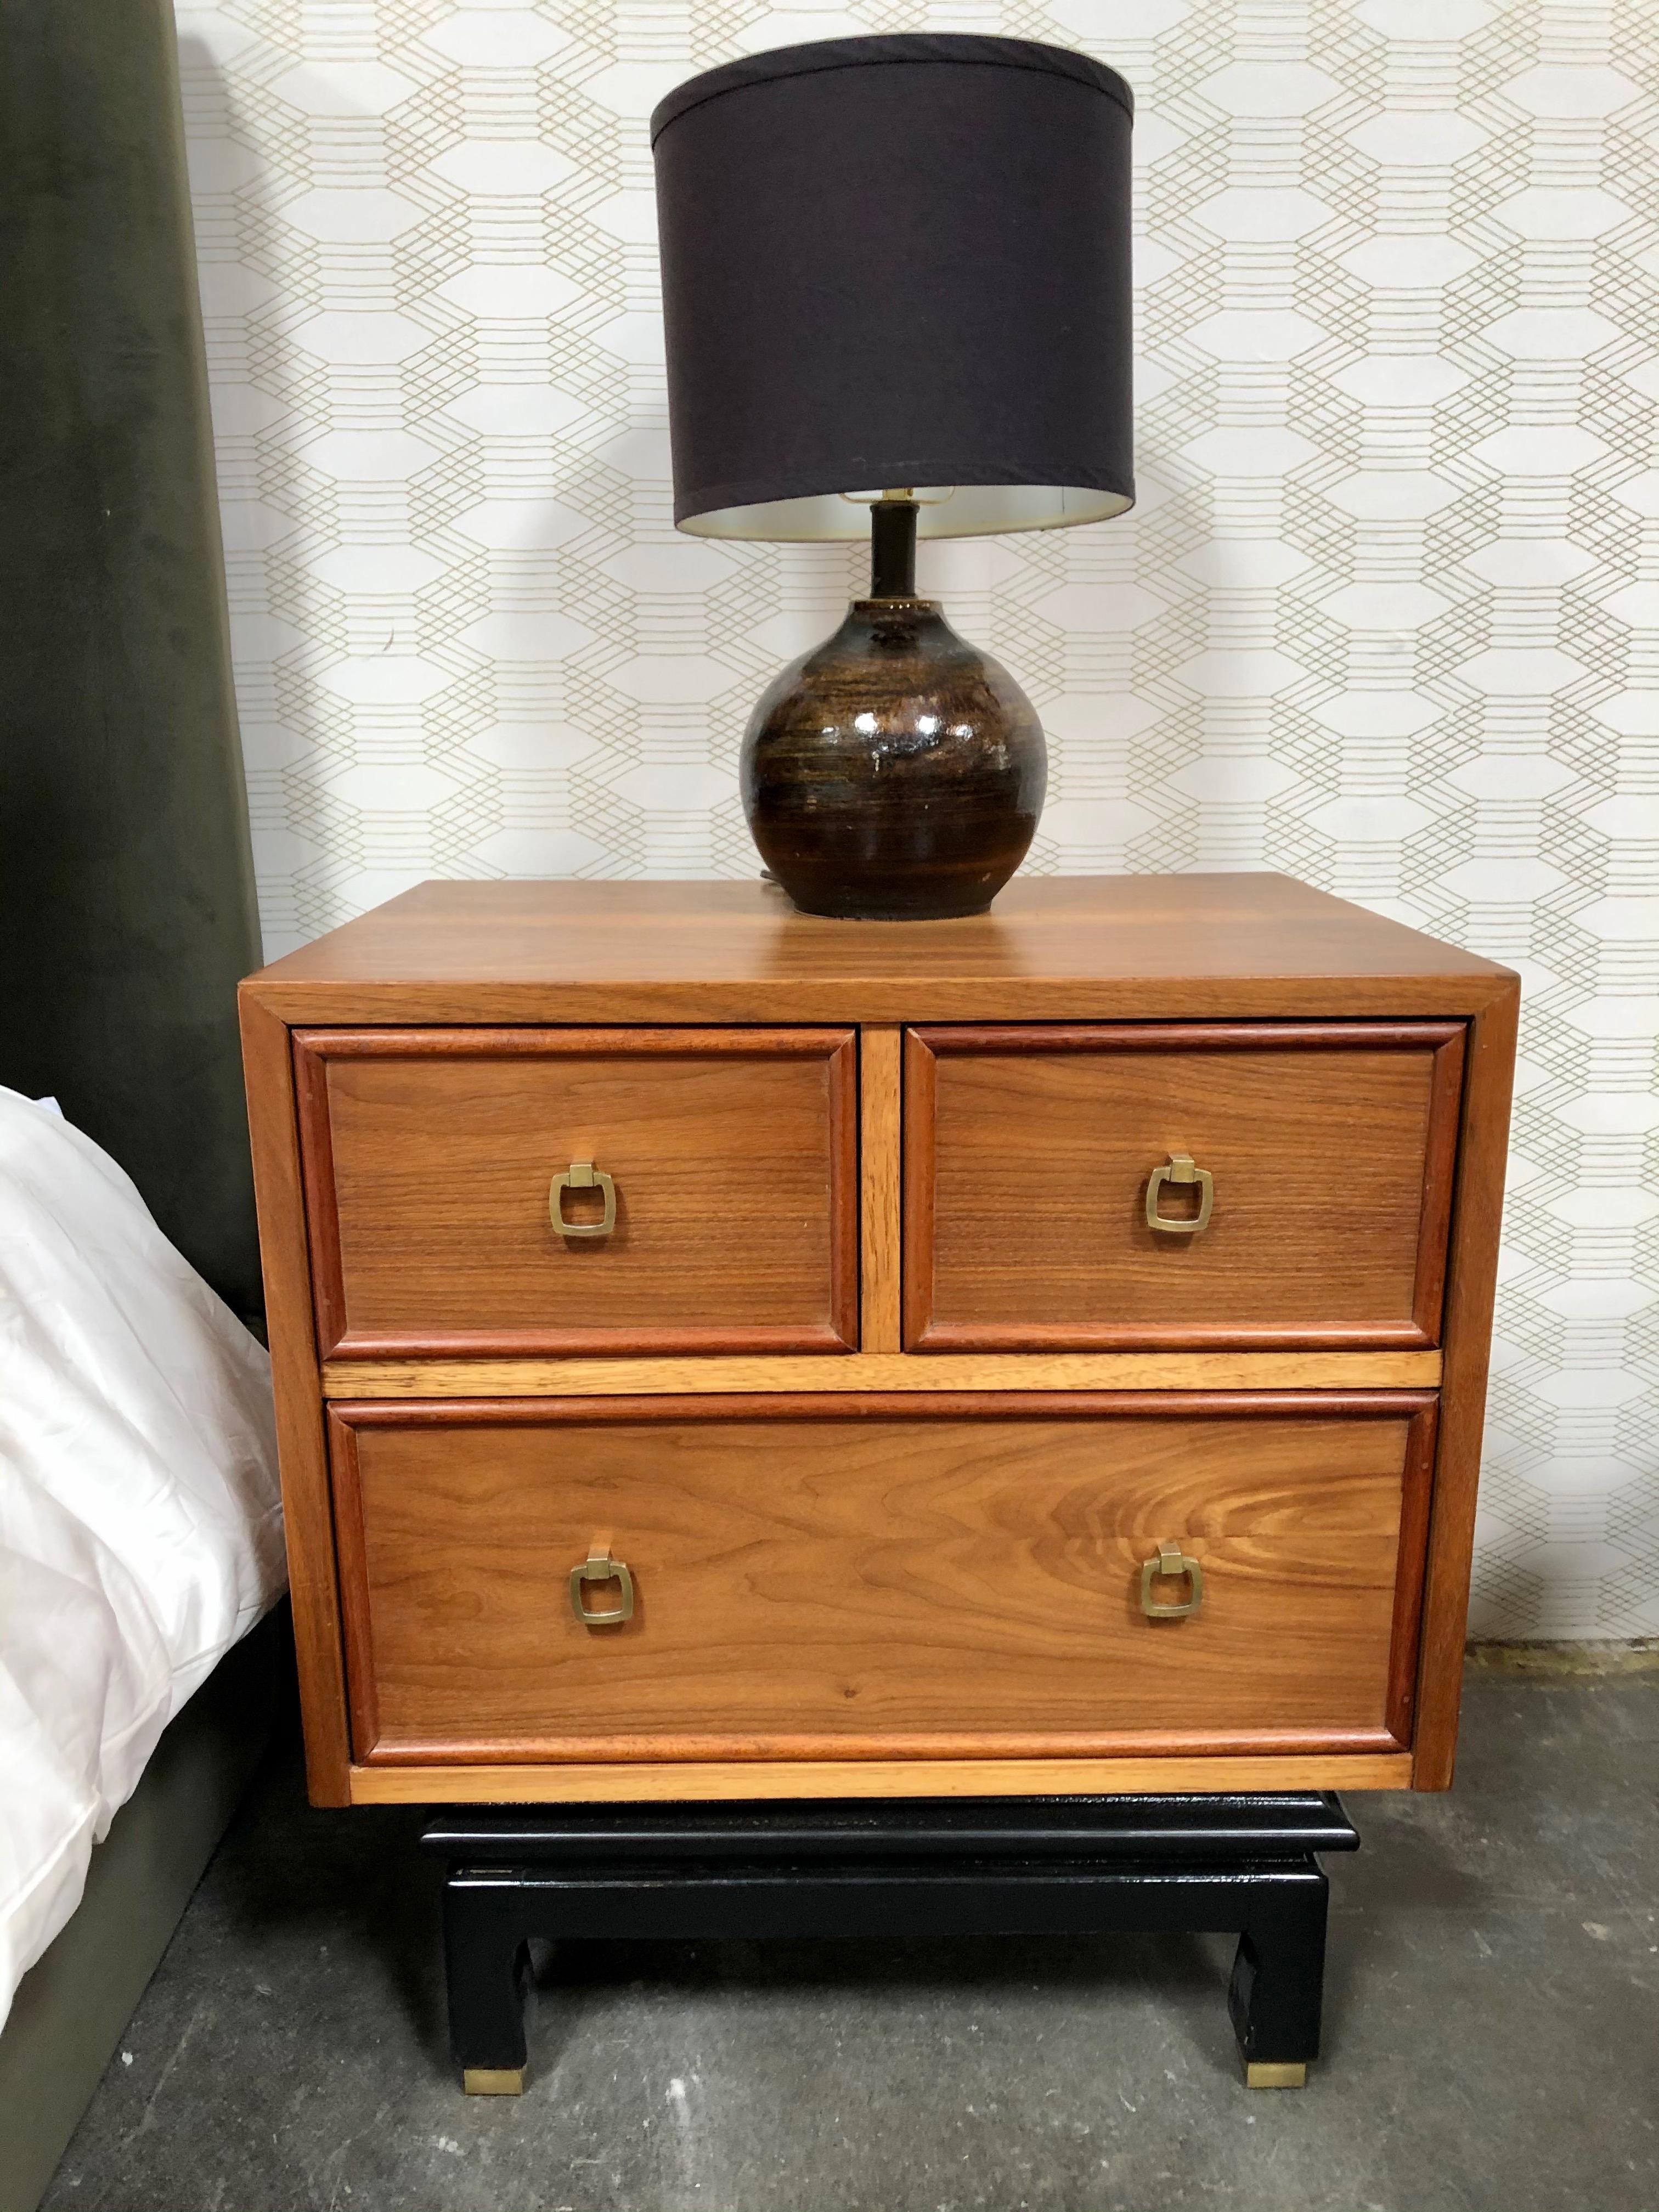 This set is sold as a pair. Each nightstand comes in a light stain wood color and features three pull out drawers each: two smaller drawers on the top and one larger one on the bottom (see photo).